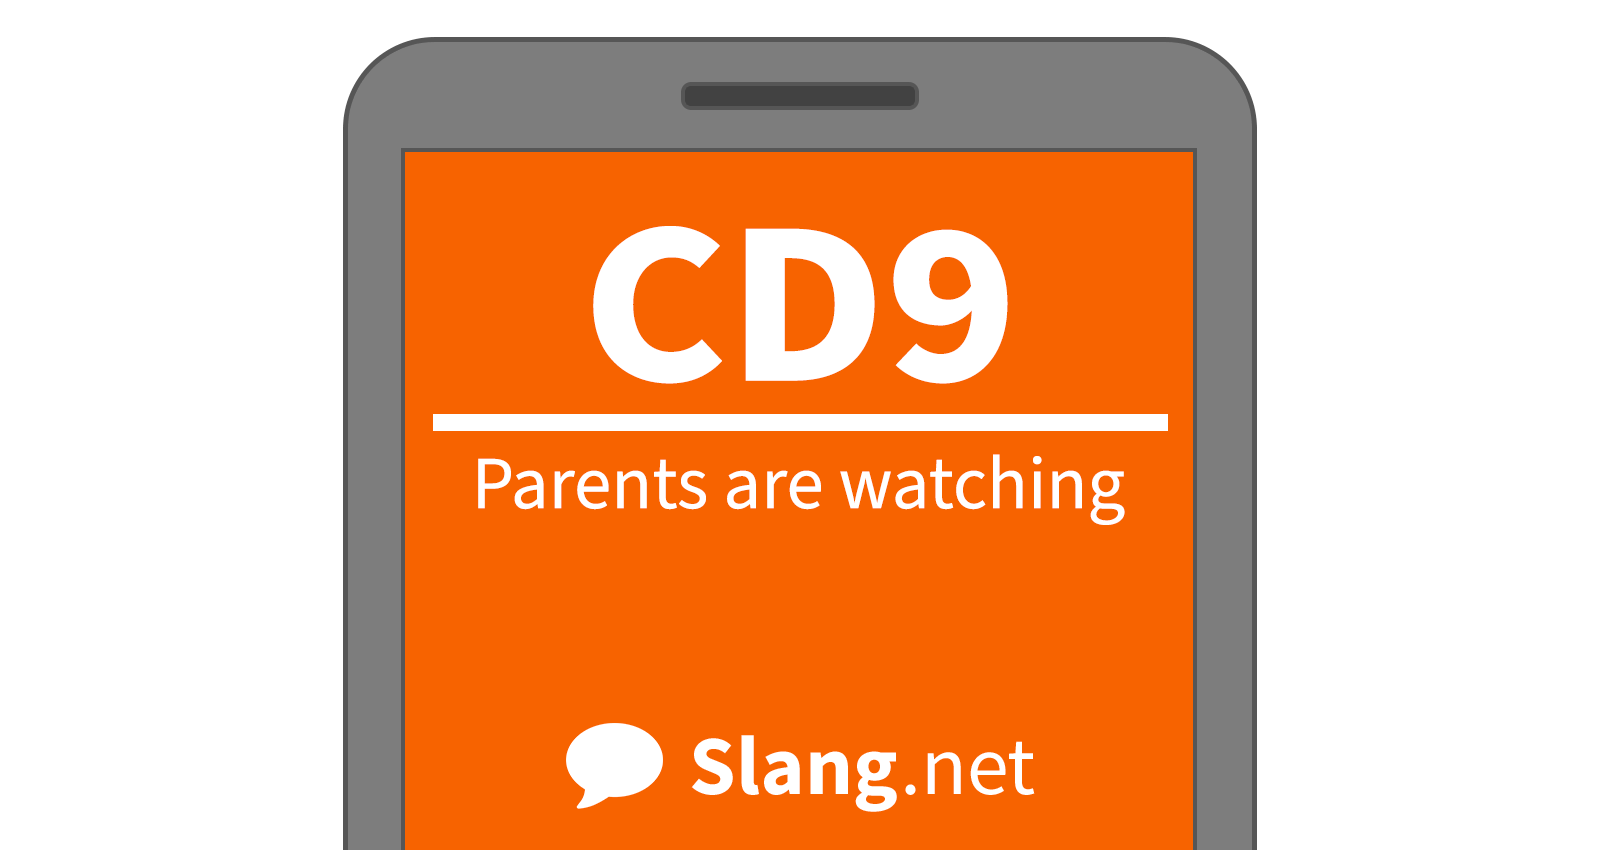 CD9 means &quot;parents are watching&quot;